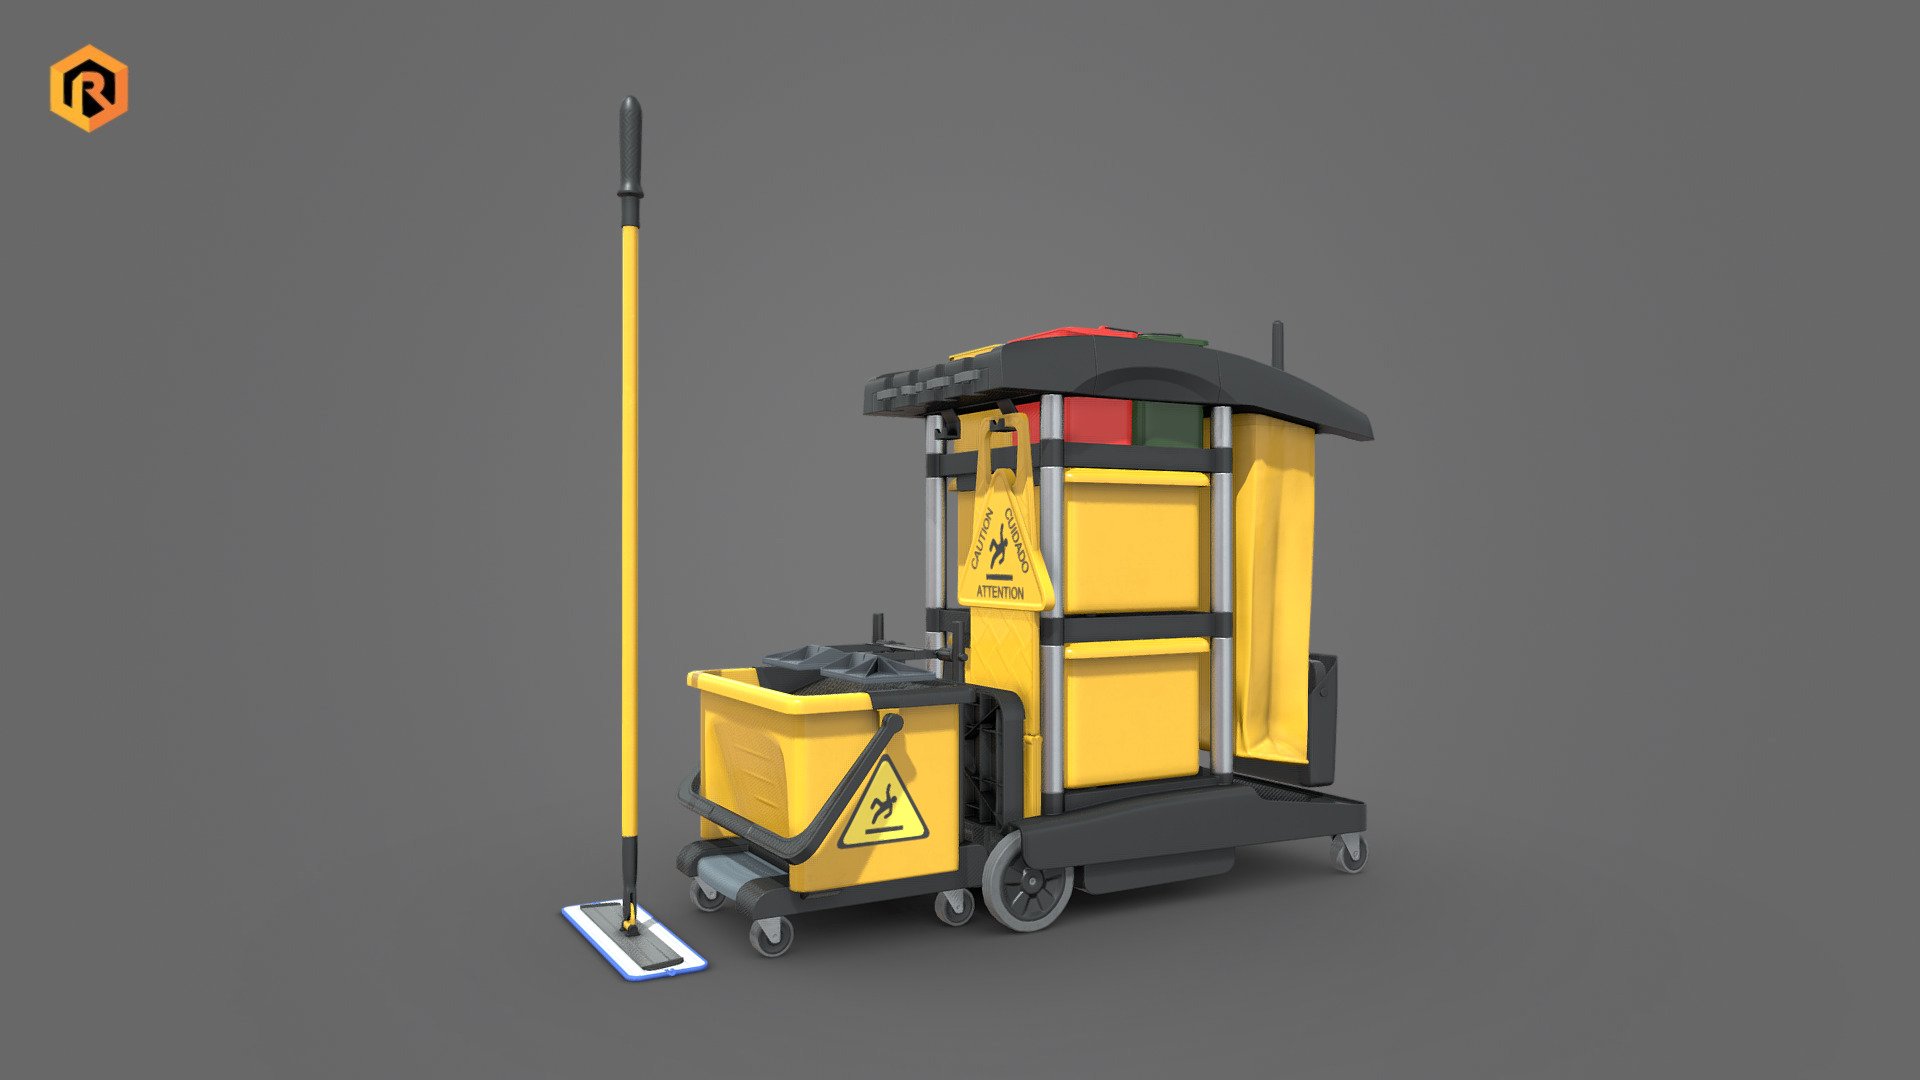 Low-poly PBR 3D model of Cleaning Cart.

The model is divided into several elements to make it more configurable.

This asset is best for use in games and other VR/AR, real-time applications such as Unity or Unreal Engine.

It can also be rendered in Blender (ex Cycles) or Vray as the model is equipped with all required PBR textures.   

Technical details:   




2 PBR textures sets (Main Body, Alpha)   

22398 Triangles  

21940  Vertices  

The model is divided into few objects so you can configure this assets as you need. 

Model is completely unwrapped.  

Pivot points are correctly placed to suit optional animation process.  

Lot of additional file formats included (Blender, Unity, Maya etc.)  

More file formats are available in additional zip file on product page.

Please feel free to contact me if you have any questions or need any support for this asset.

Support e-mail: support@rescue3d.com - Cleaning Cart - Buy Royalty Free 3D model by Rescue3D Assets (@rescue3d) 3d model